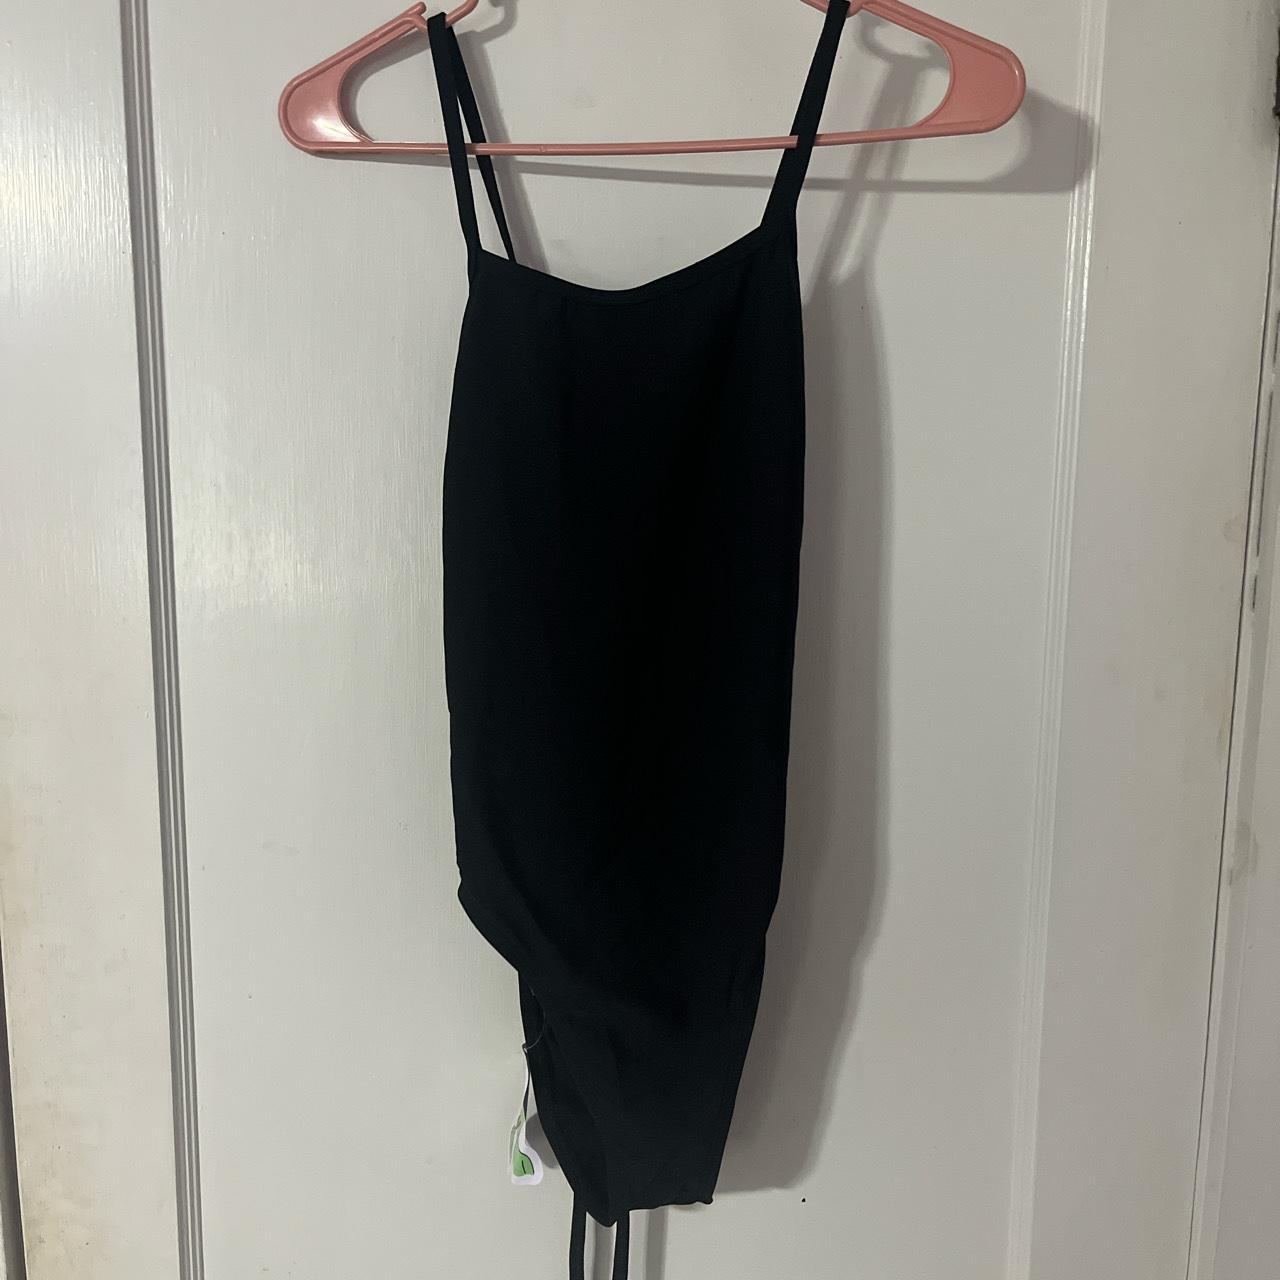 BRAND NEW NICO 3 JOLYN**** - never worn, tags and... - Depop